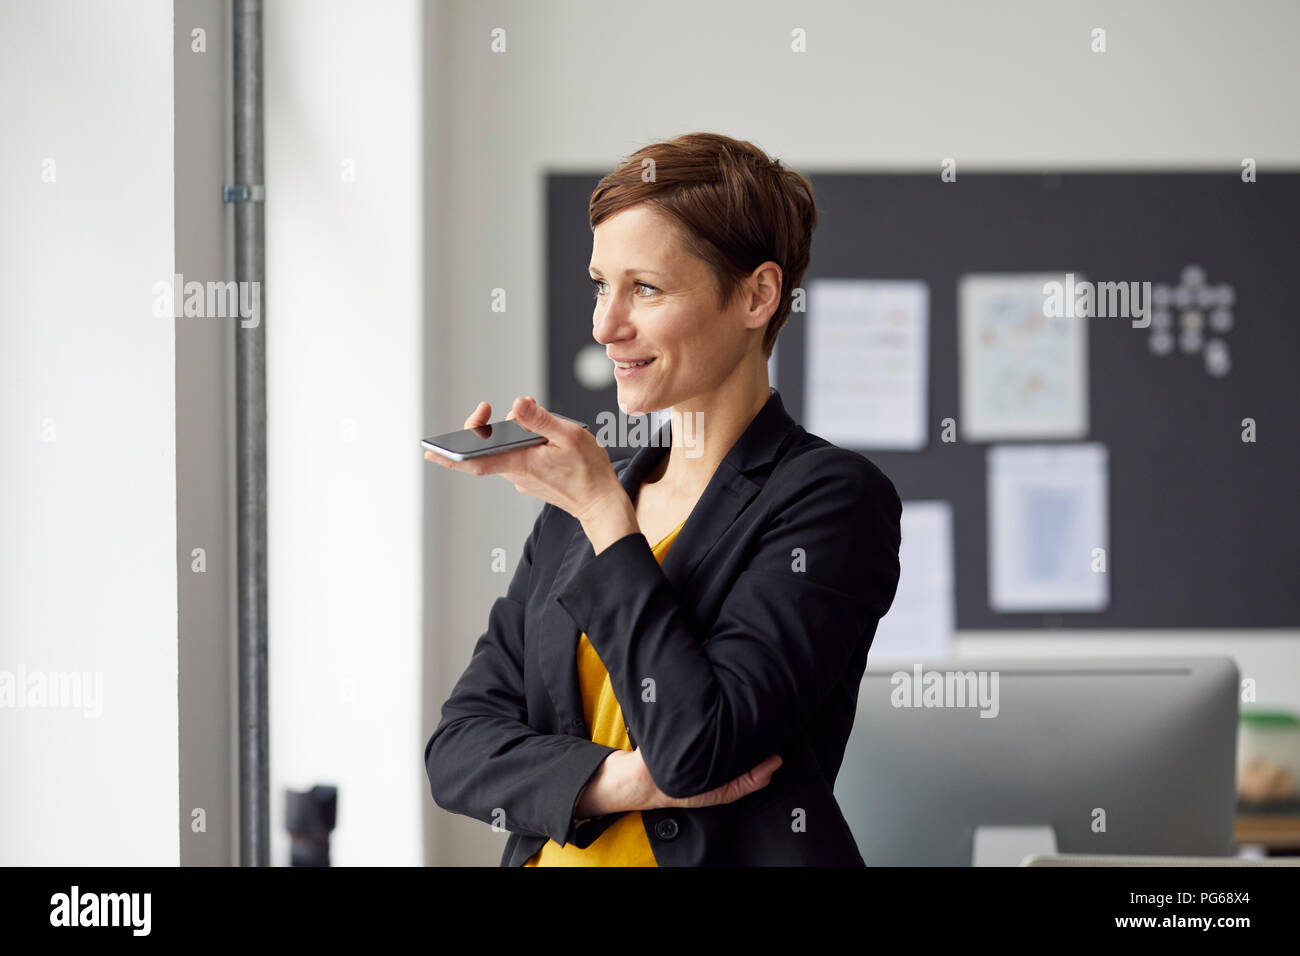 Attractive businesswoman standing in office, using smartphone Banque D'Images